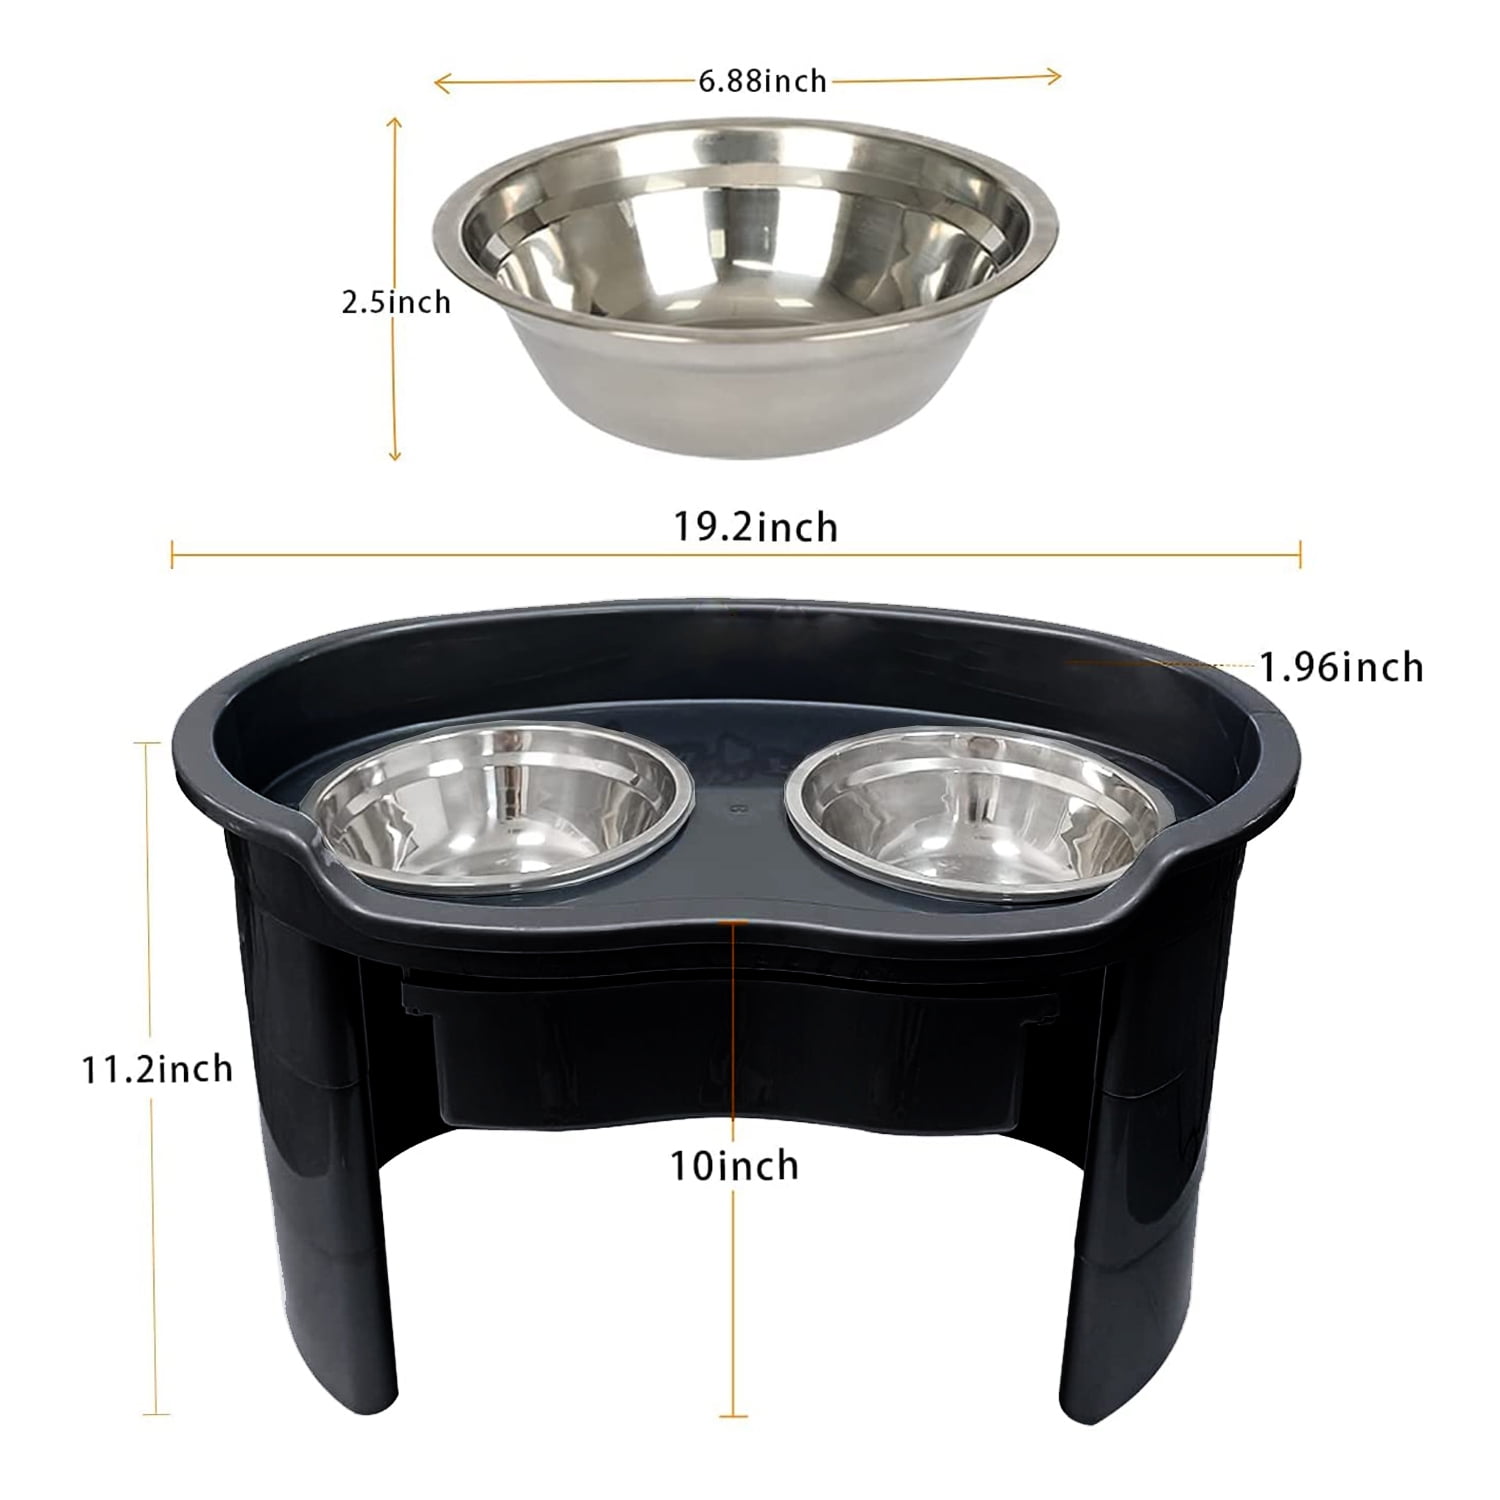 Raised Pet Bowls for Cats and Dogs, Outdoor Elevated Dog Cat Food and Water Bowls Stand Feeder on Aluminum Legs with 2 Stainless Steel Bowls Sizes